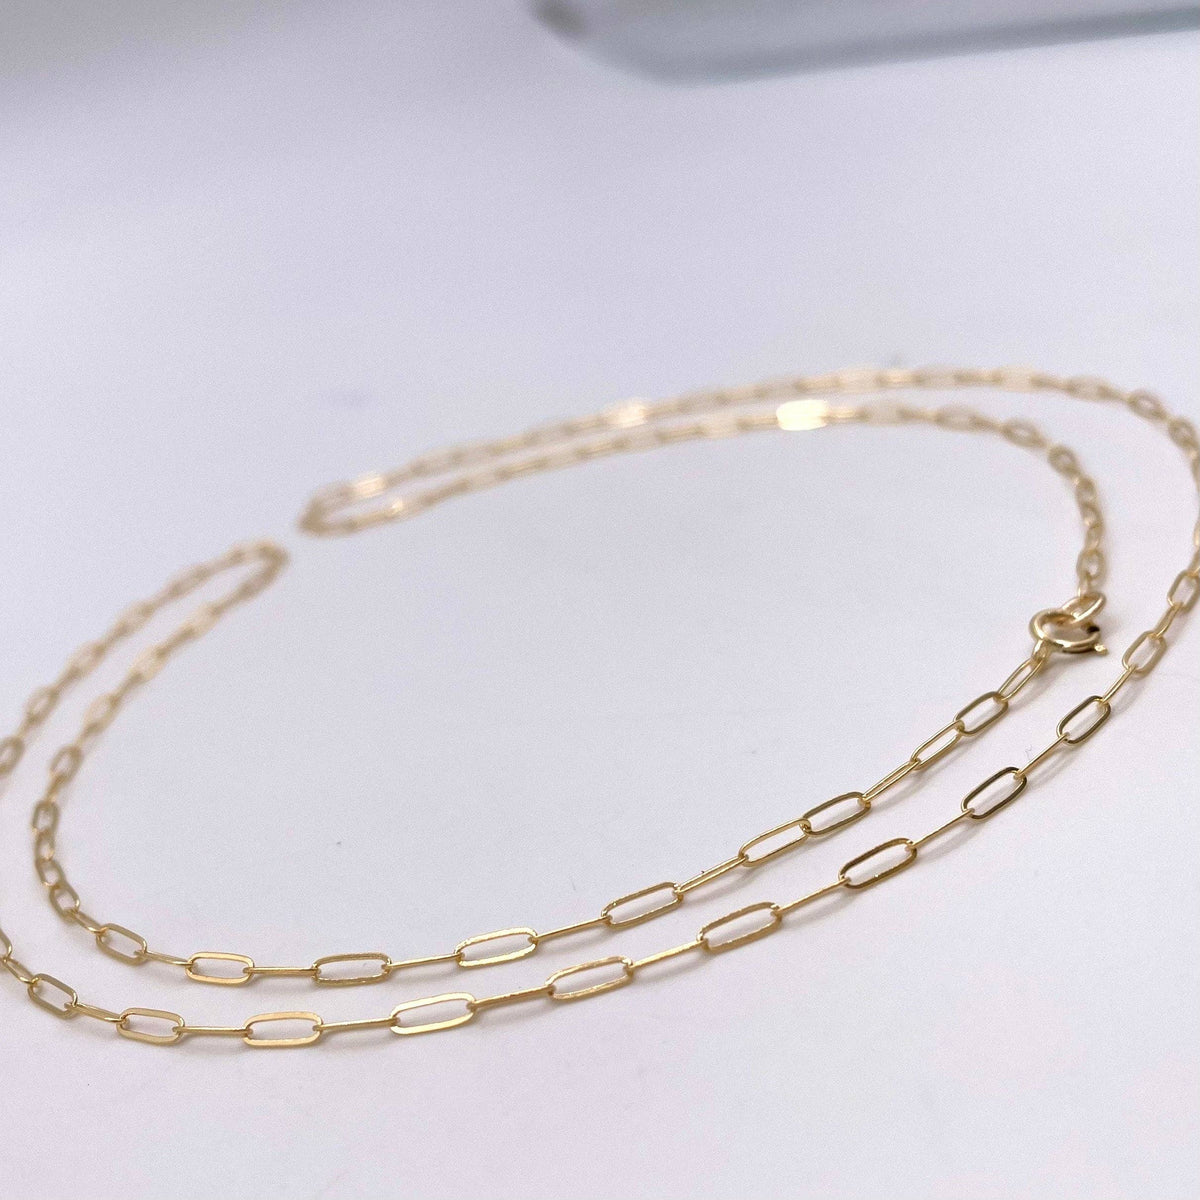 14K Gold Filled 2mm Flat Paperclip, Elongated Cable Link: 16